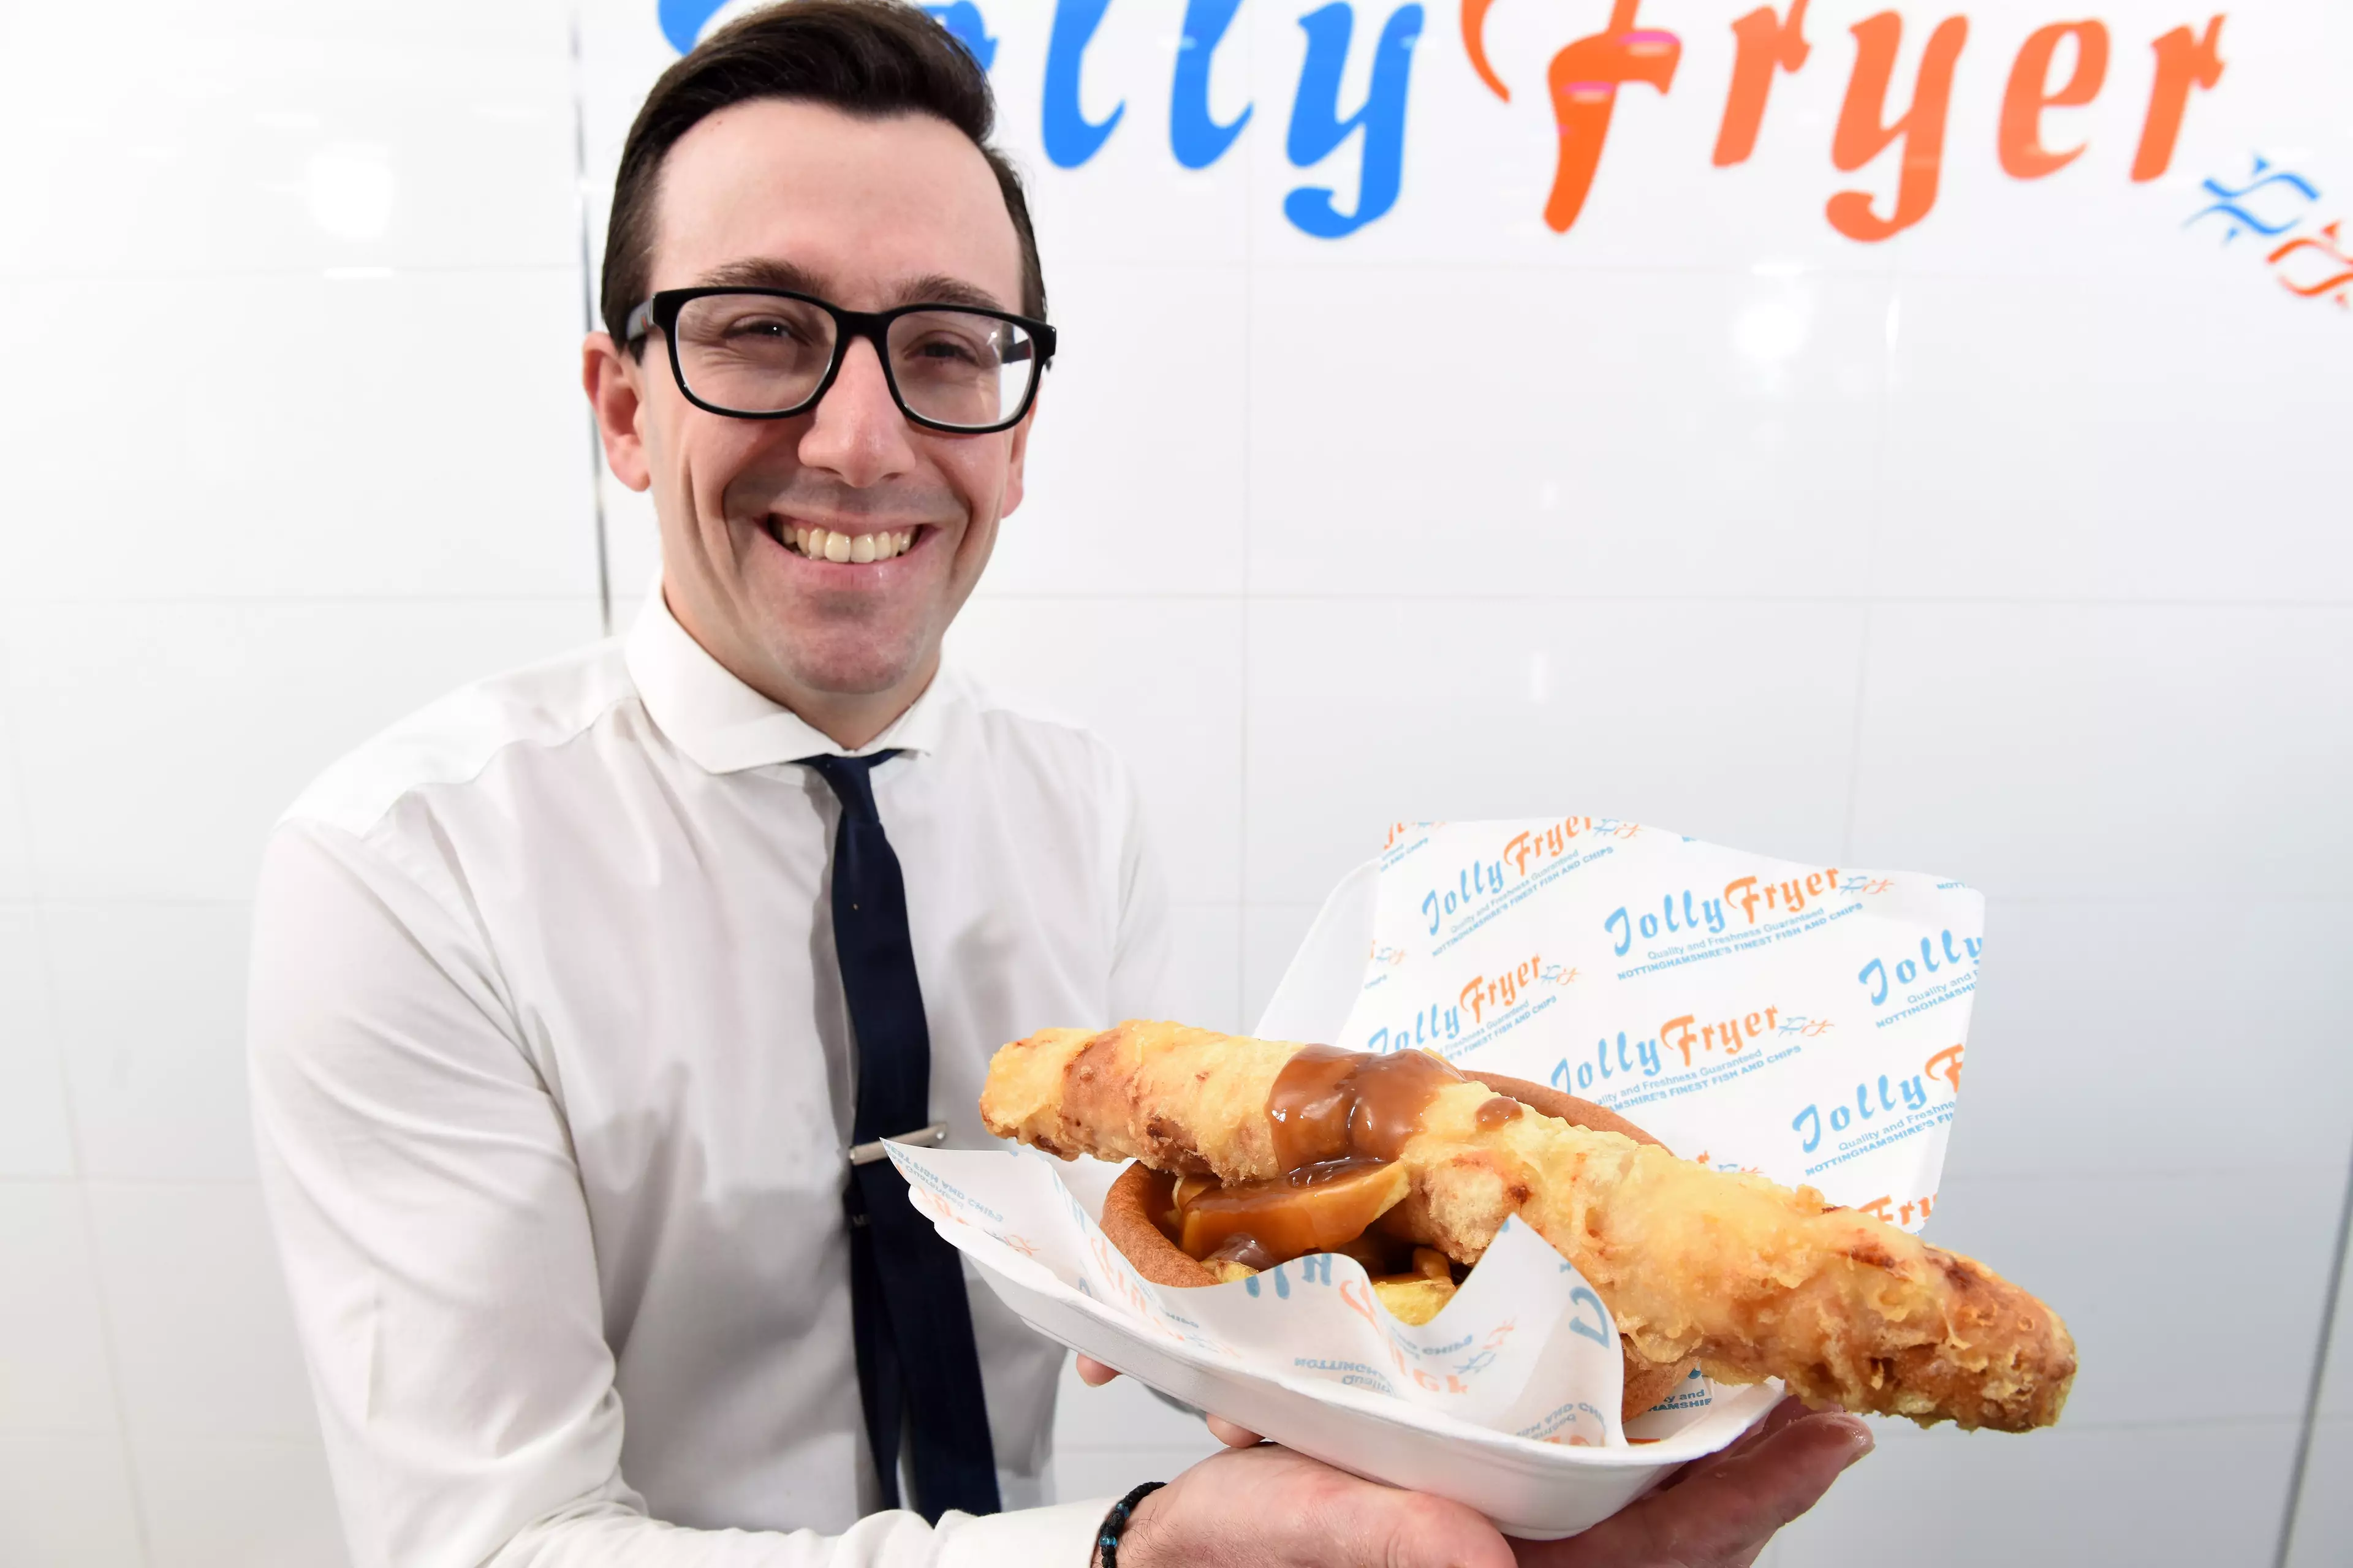 You'll have to visit this Nottinghamshire chip shop, who launched a foot long, deep friend pig in blanket (